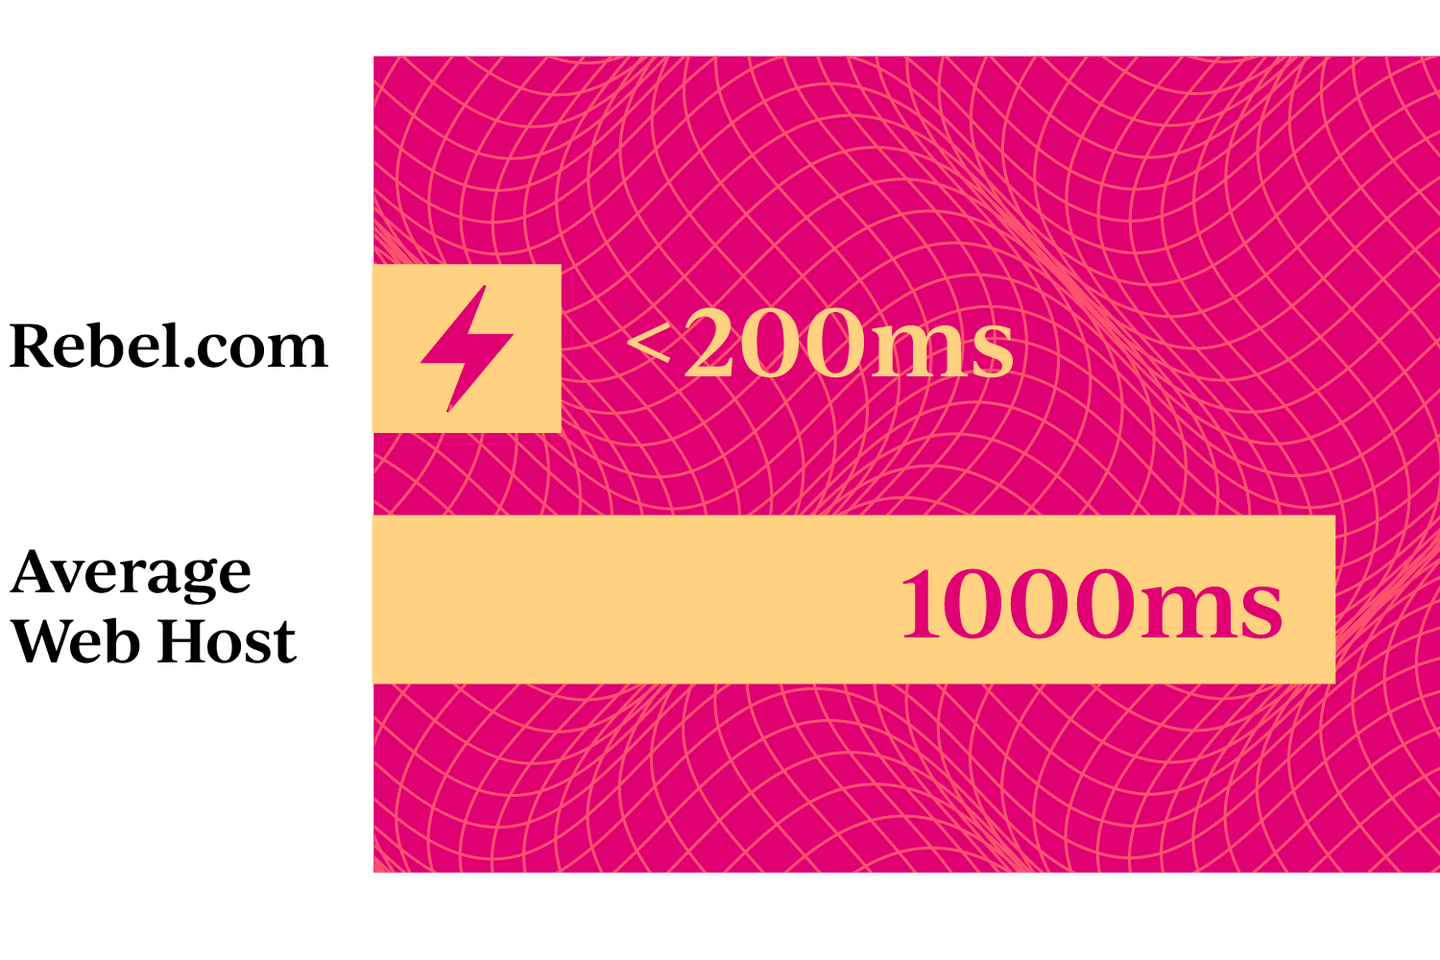 Rebel graphic showing 200 milliseconds fast